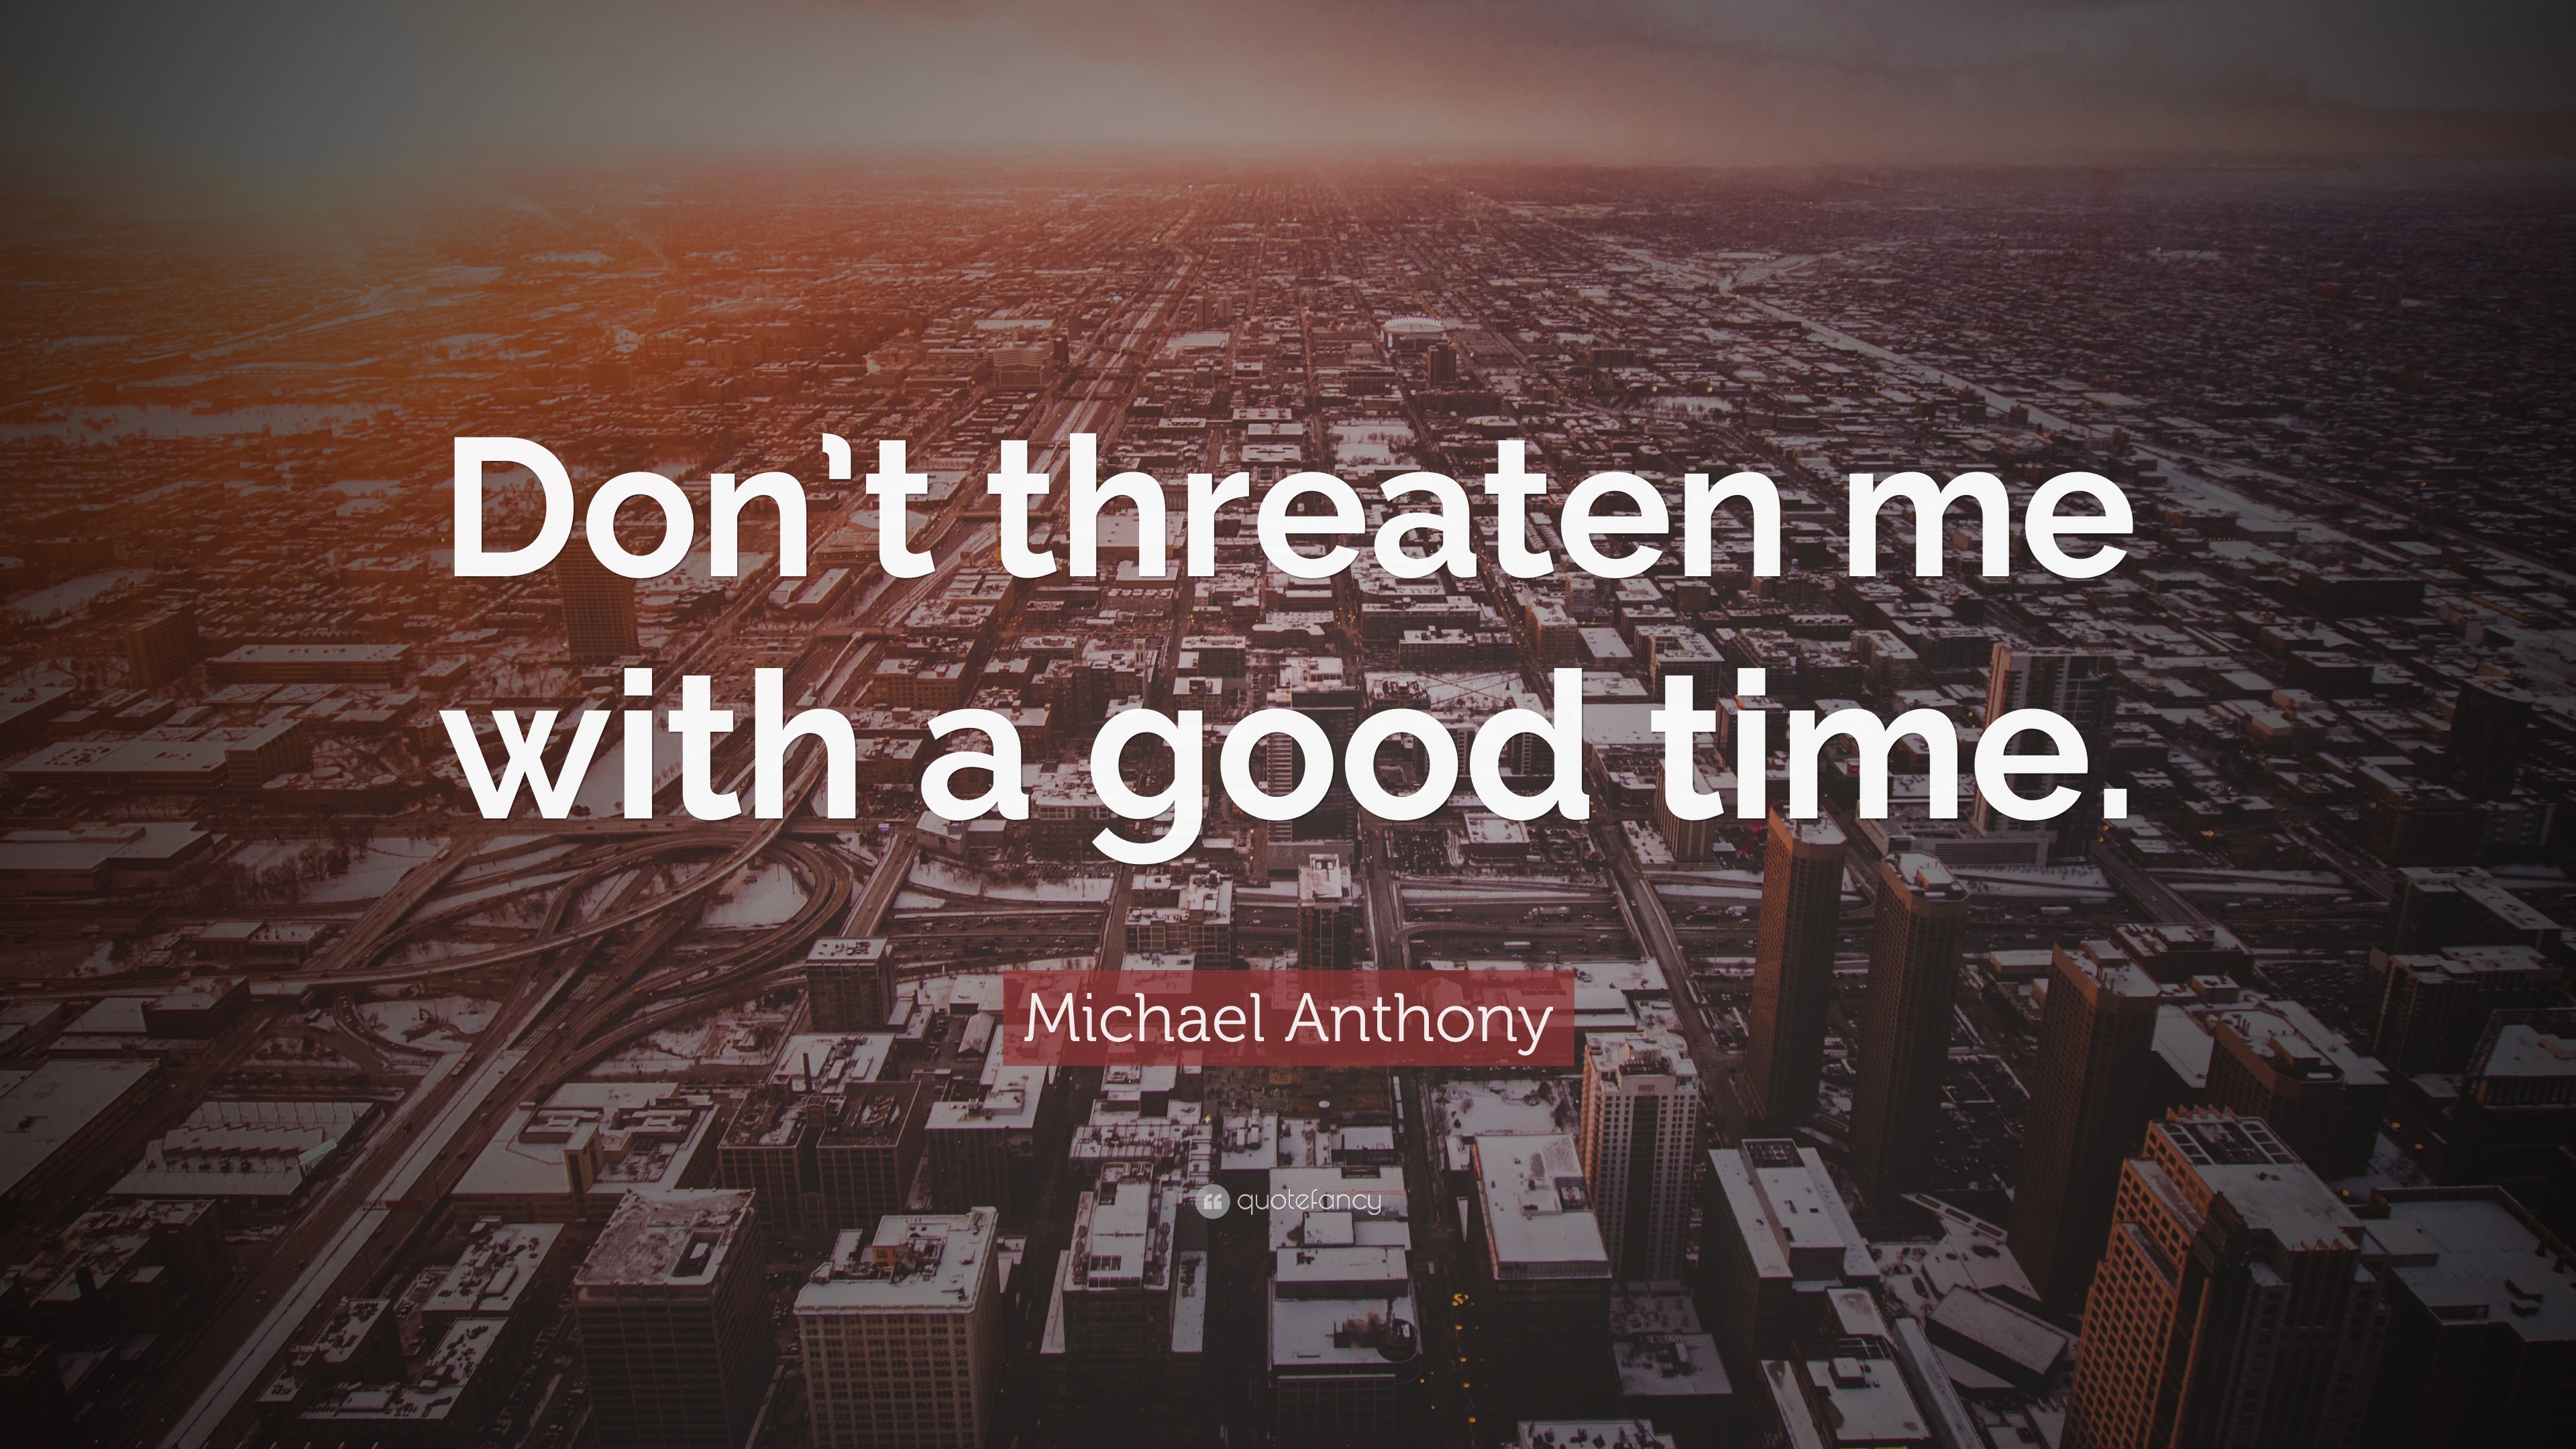 Michael Anthony Quote: “Don't threaten me with good